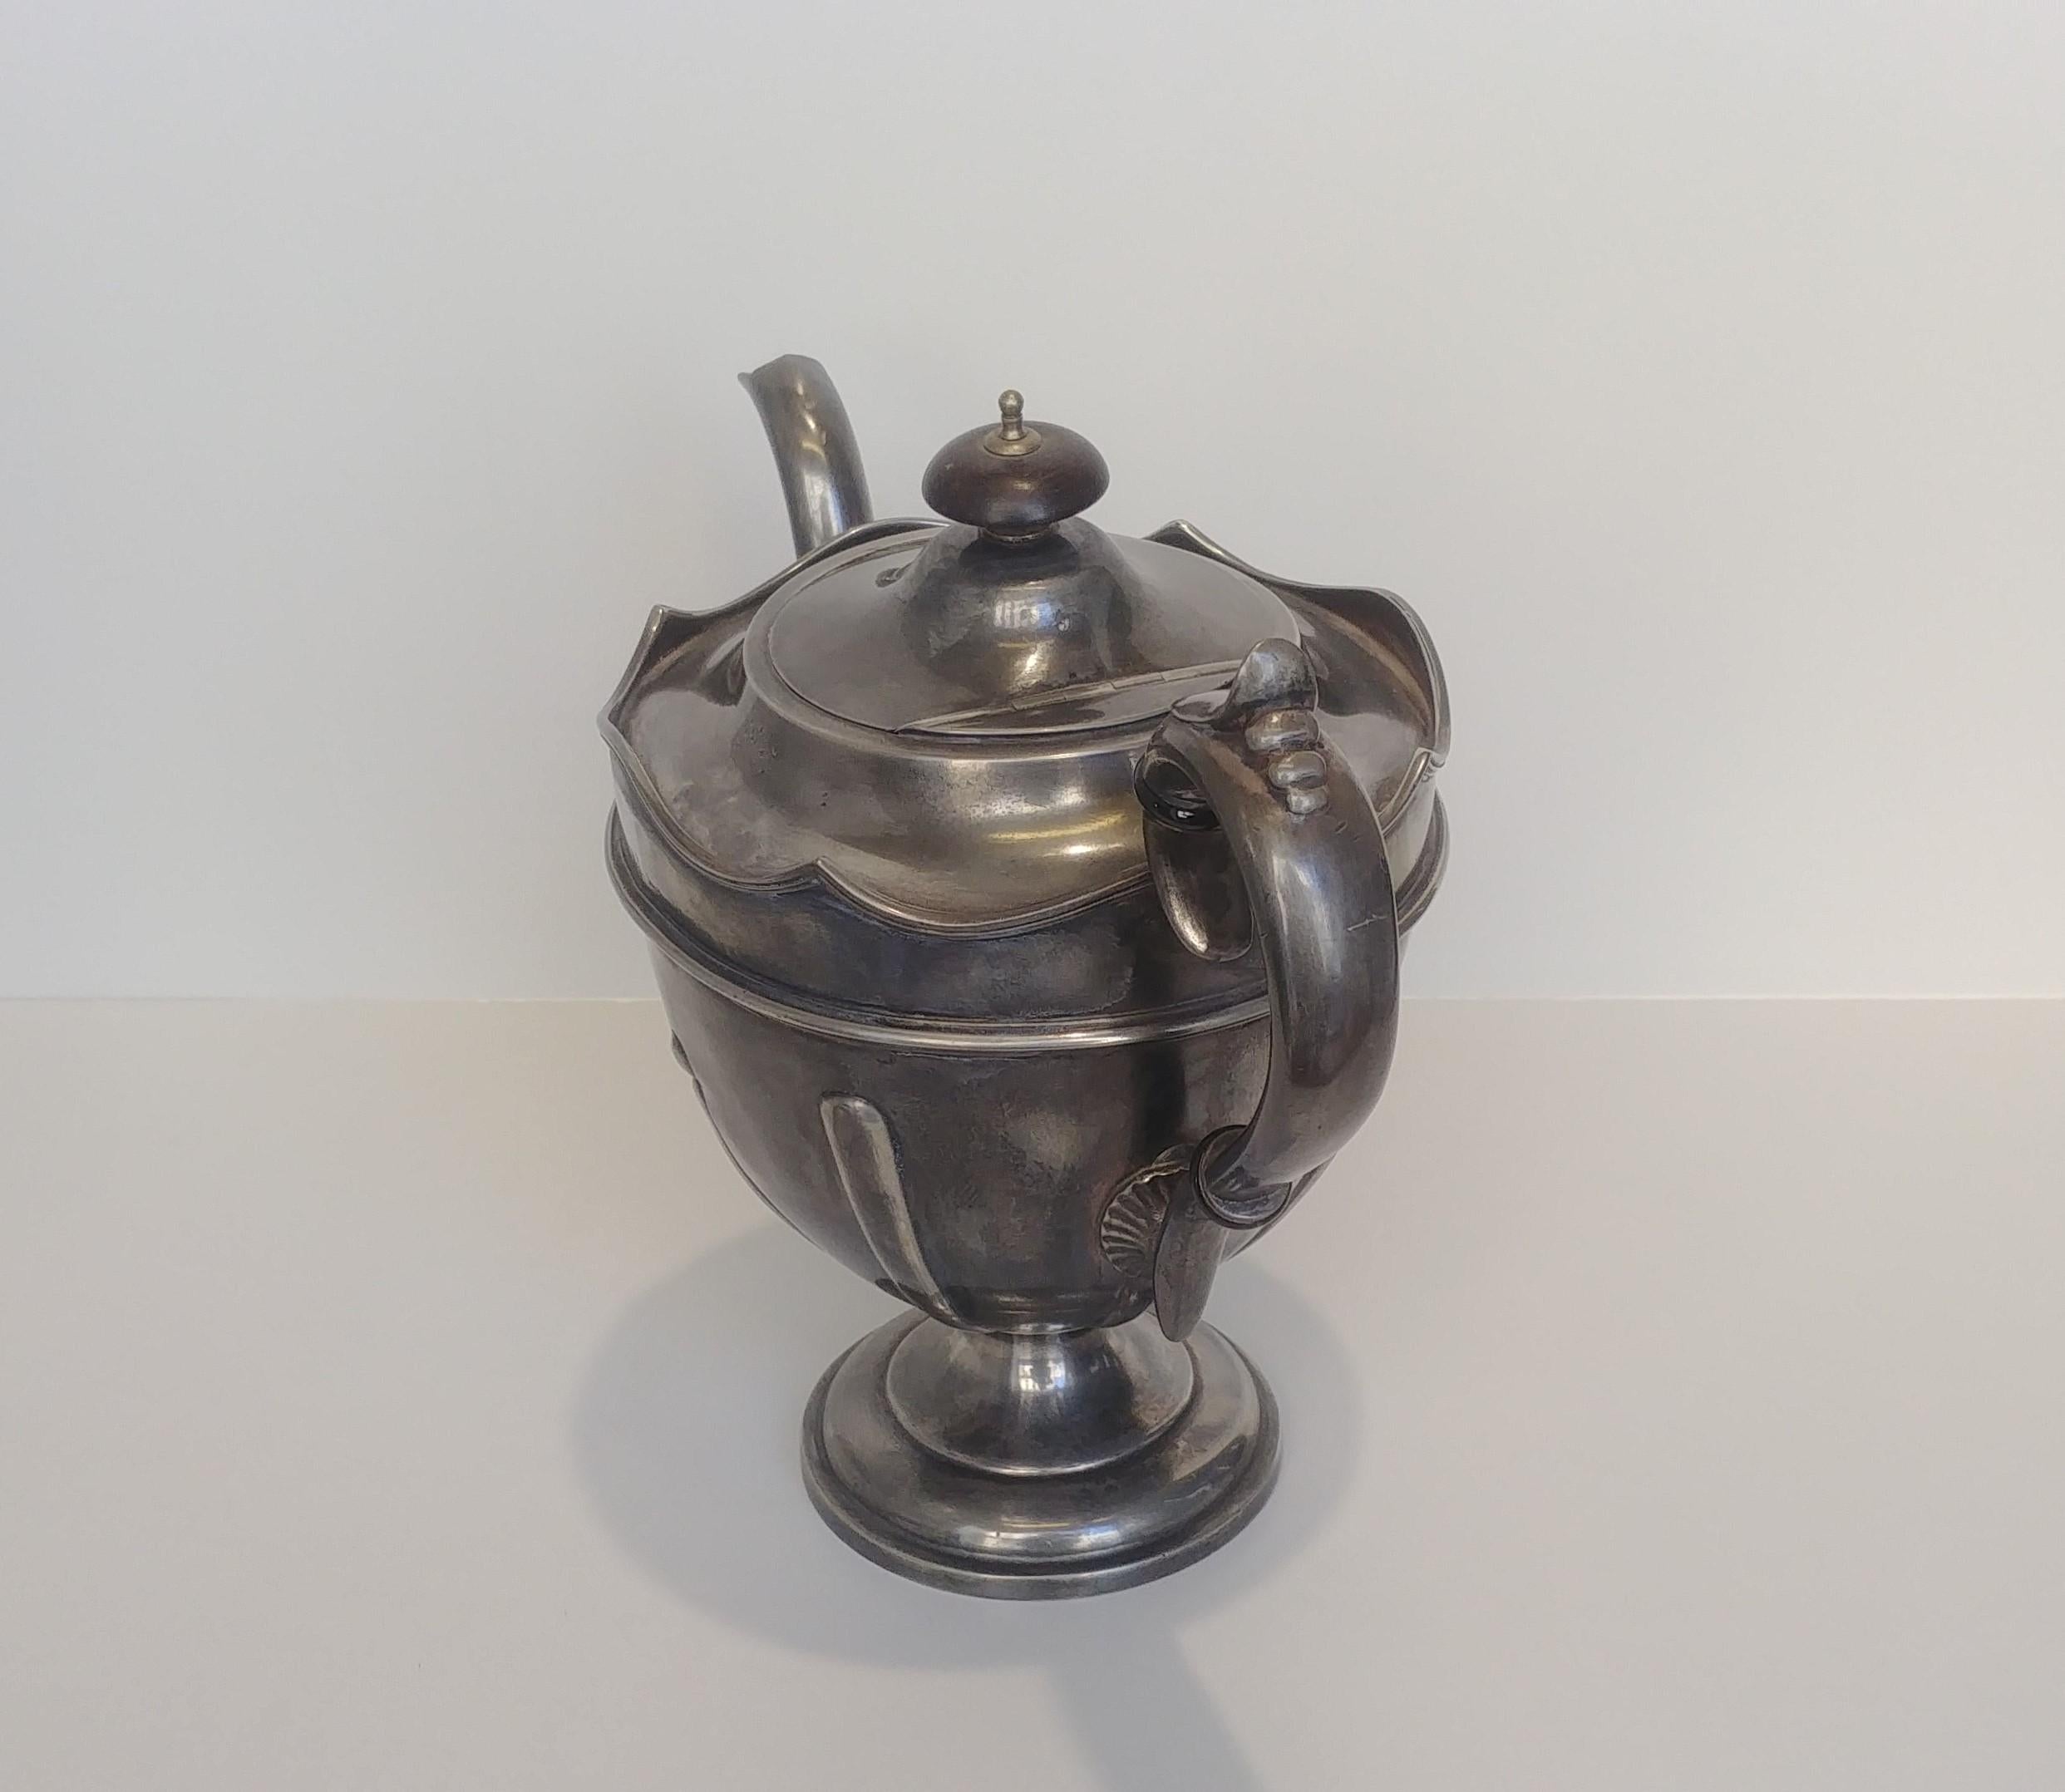 Harrison Fisher & Company Pewter Teapot from 1915 In Good Condition For Sale In Monza, IT